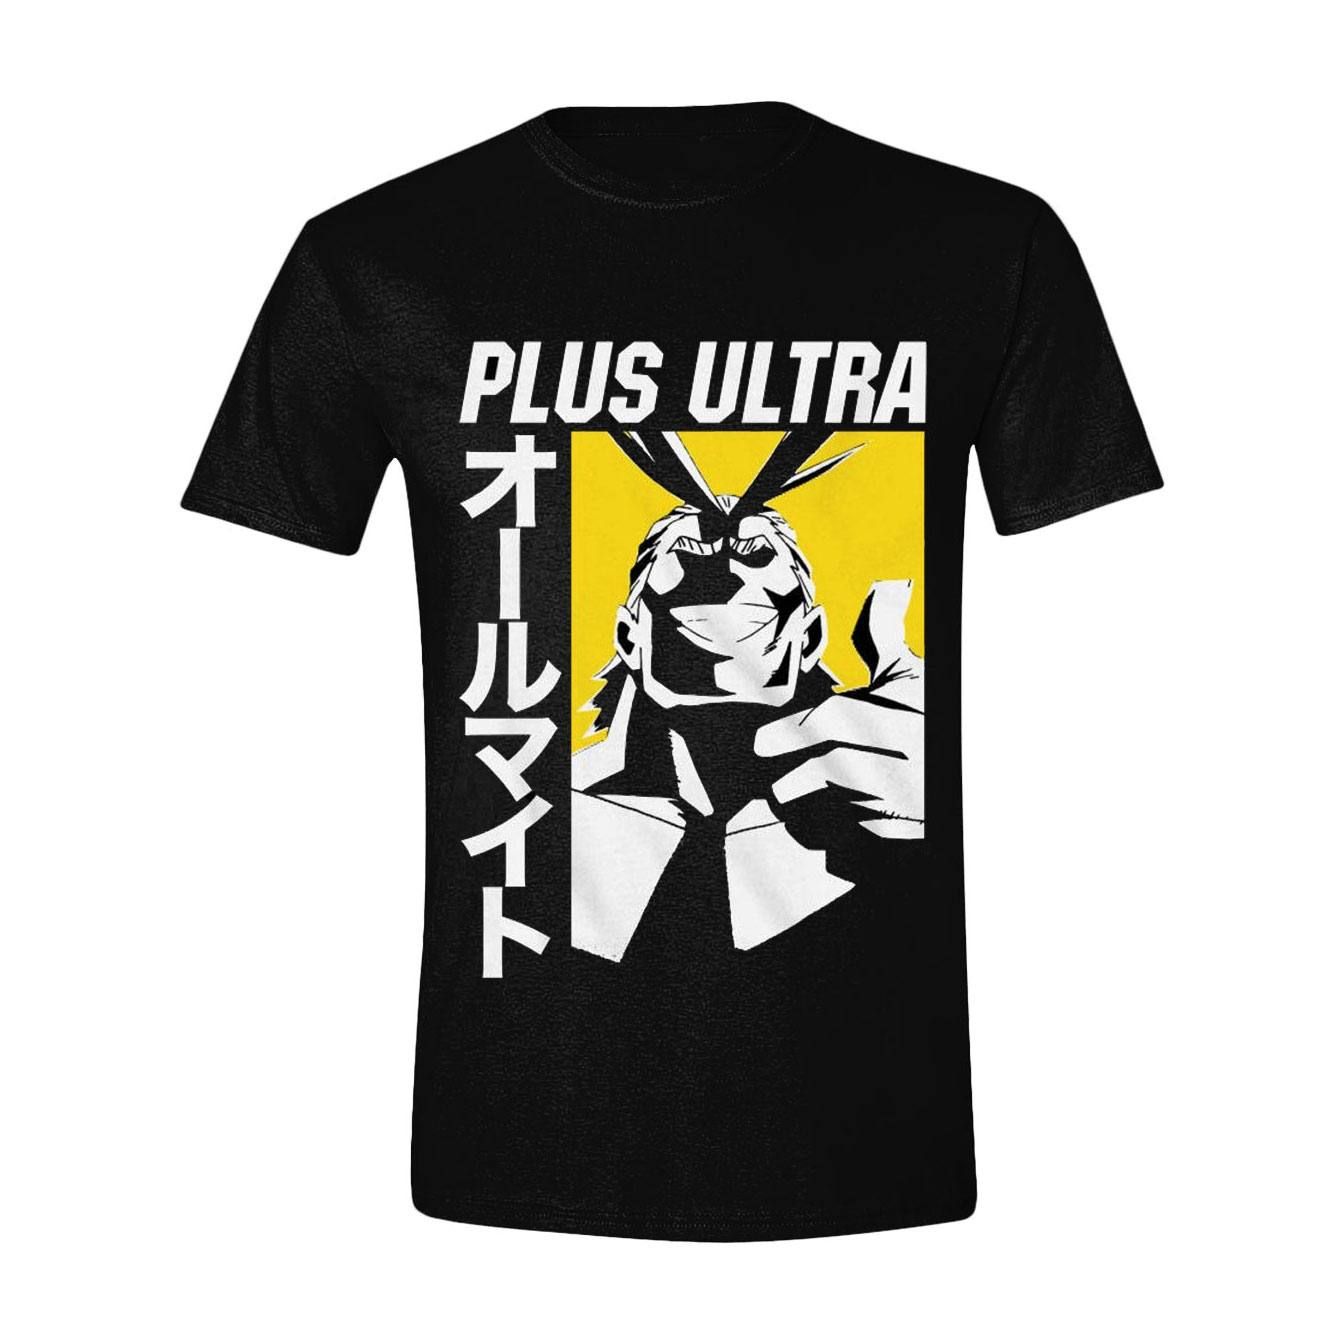 My Hero Academia T-Shirt All Might Plus Ultra Size M PCMerch